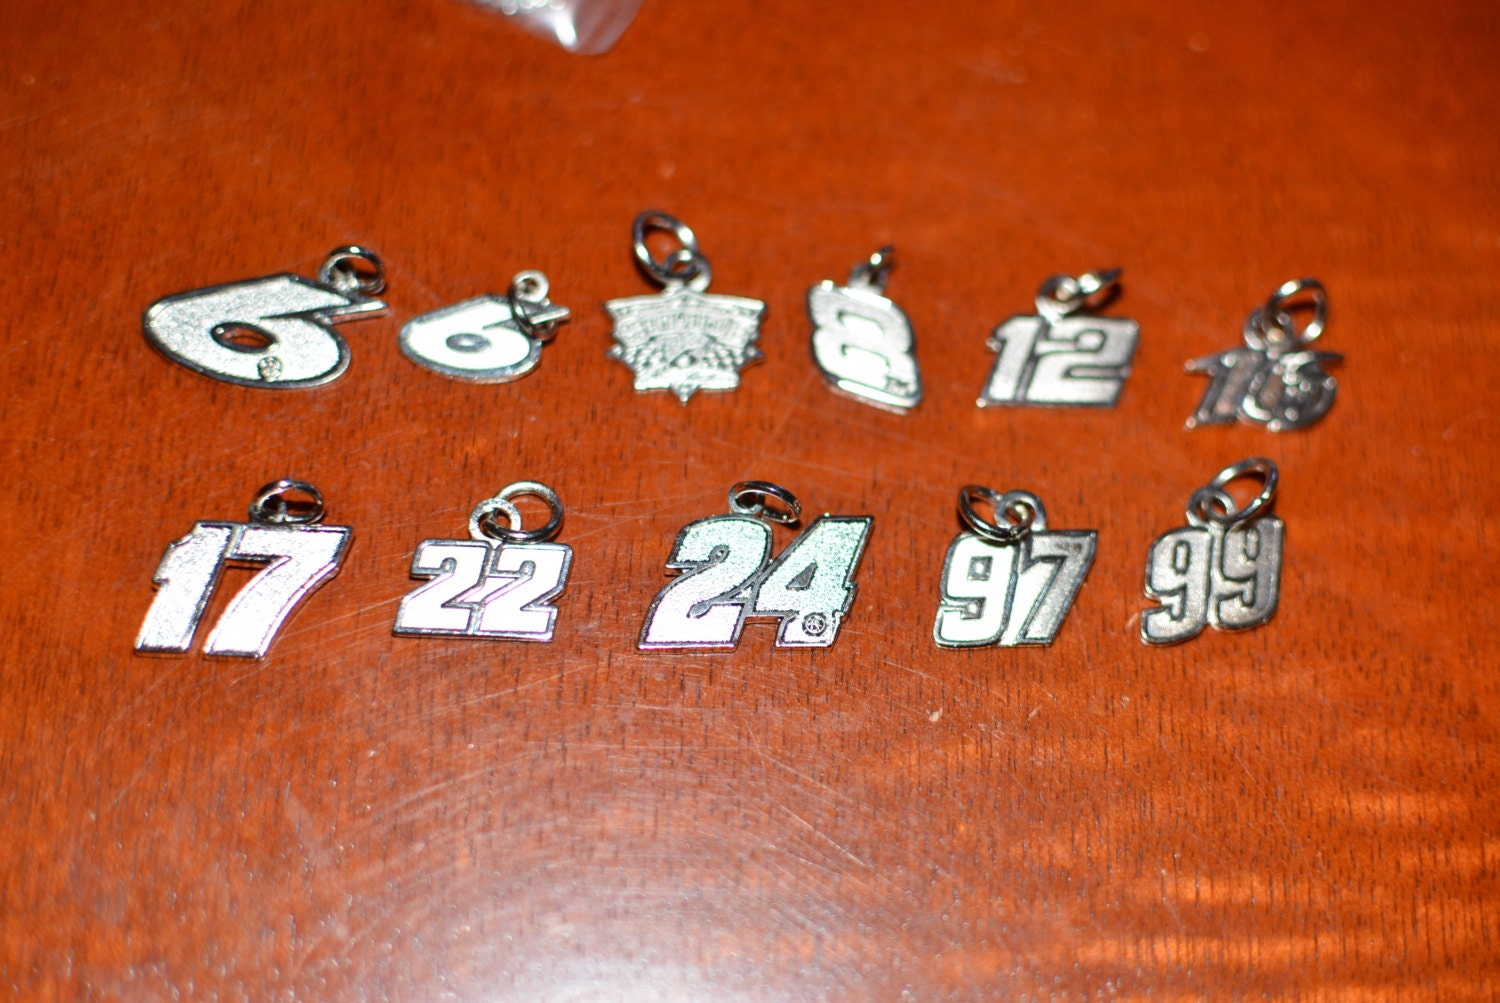 Wholesale Lot of 147 Old NASCAR Racing Car Number Charms - Great for  Necklaces Zipper Pulls Earrings Bracelets Display Projects Jewelry f1